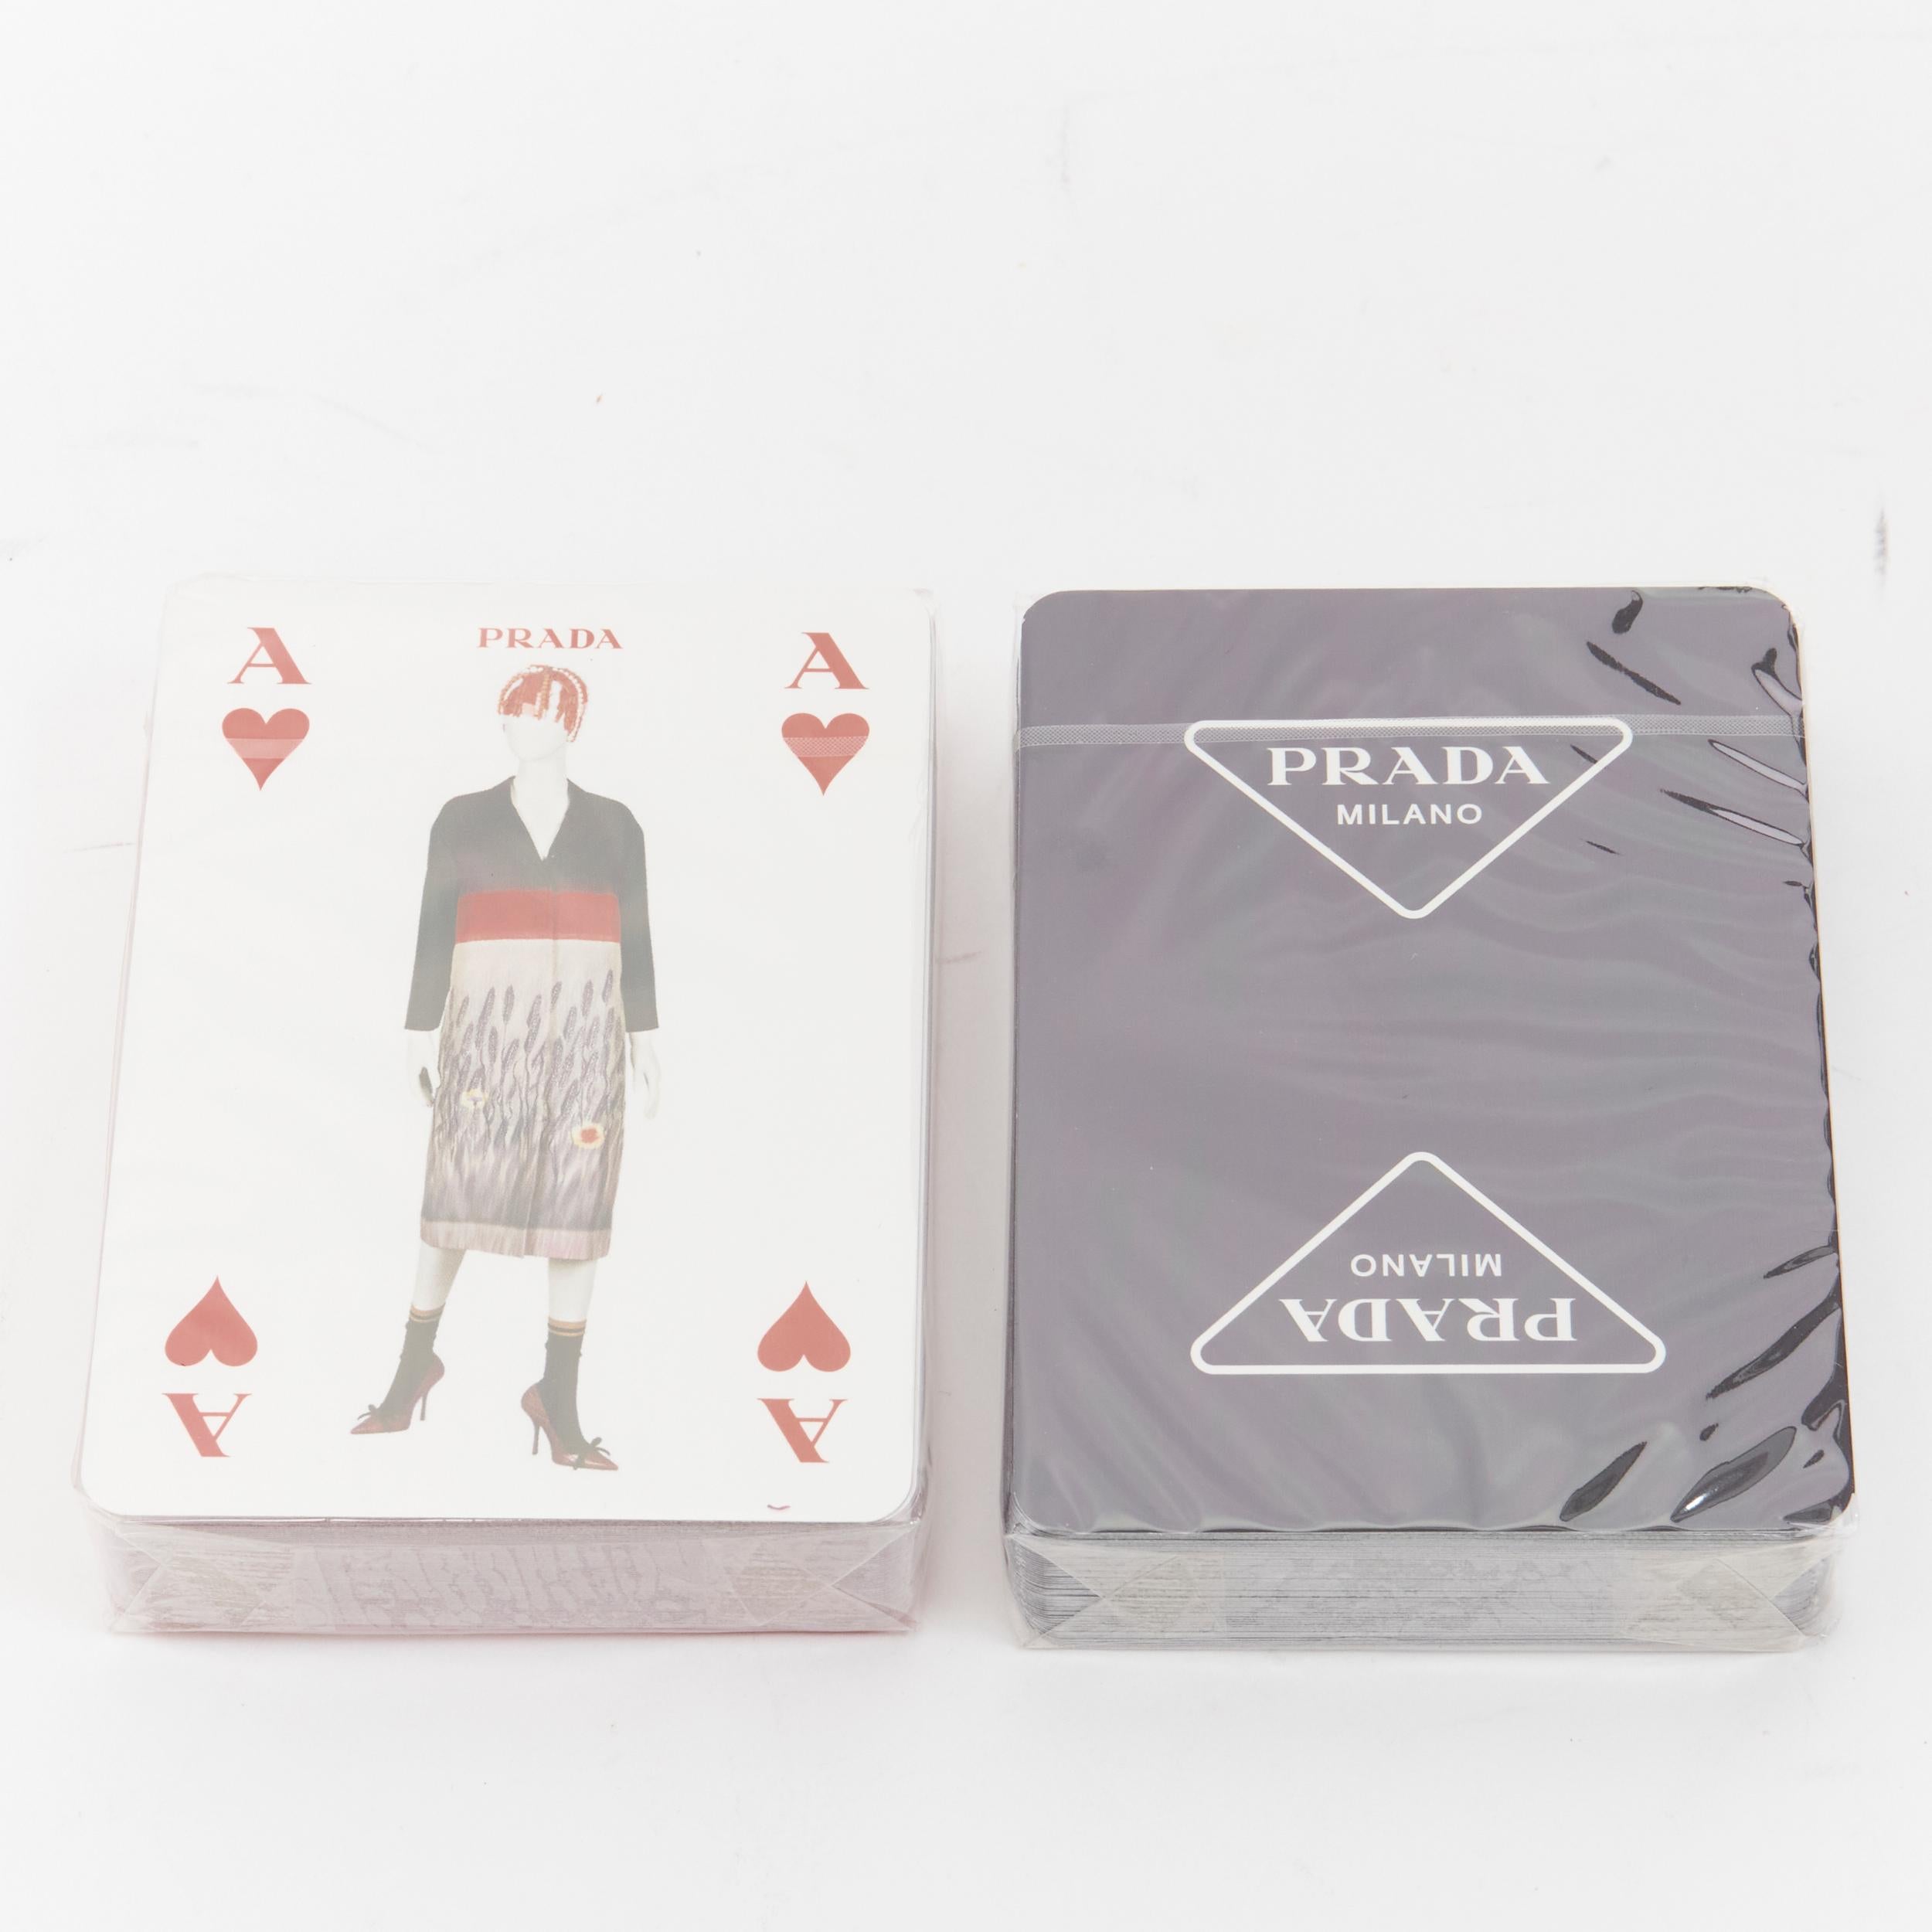 new PRADA 2021 2 pack playing cards red triangle logo envelop case pouch clutch 3